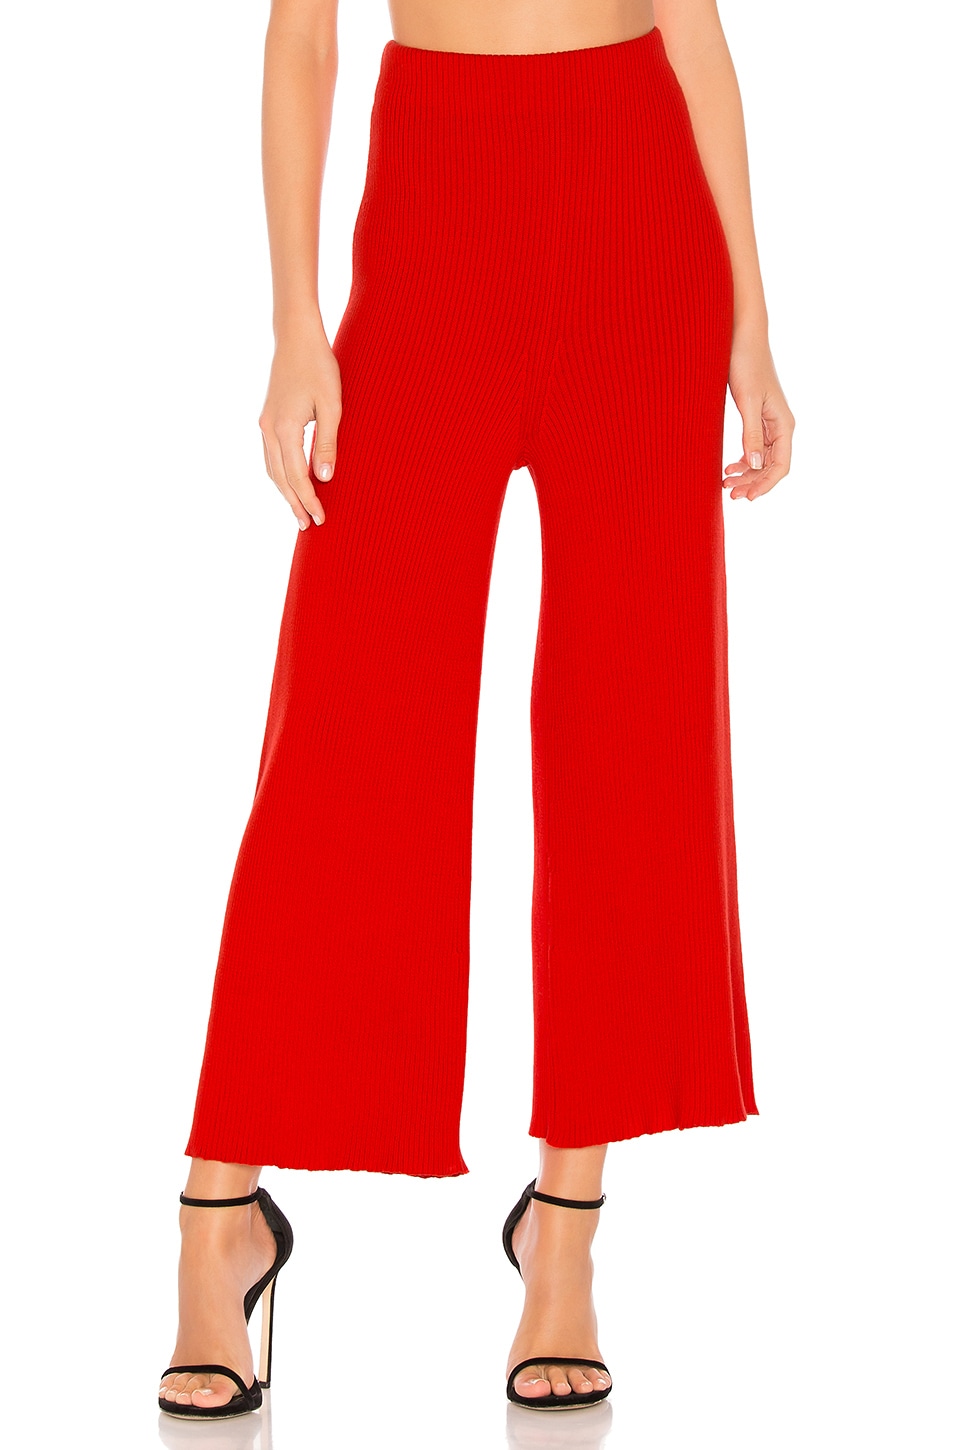 Mara Hoffman Nellie Pant in Red | REVOLVE